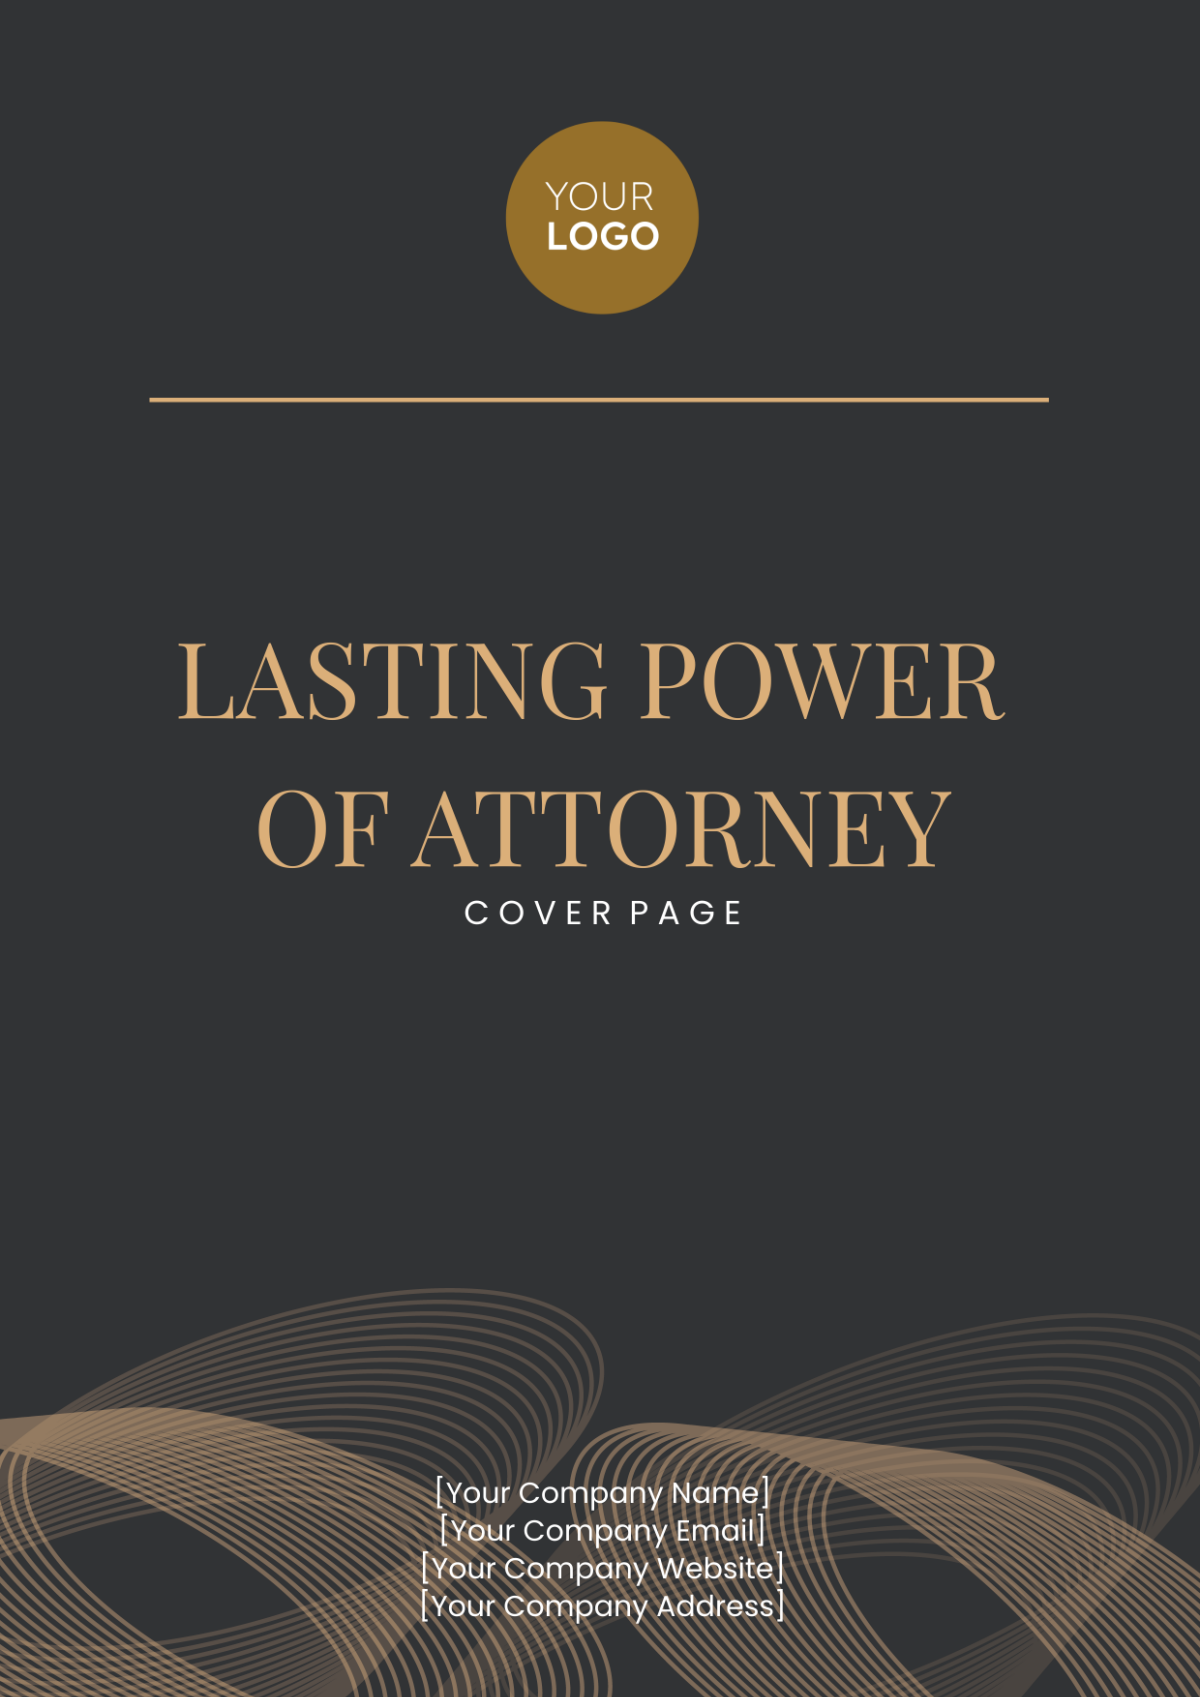 Lasting Power of Attorney Cover Page